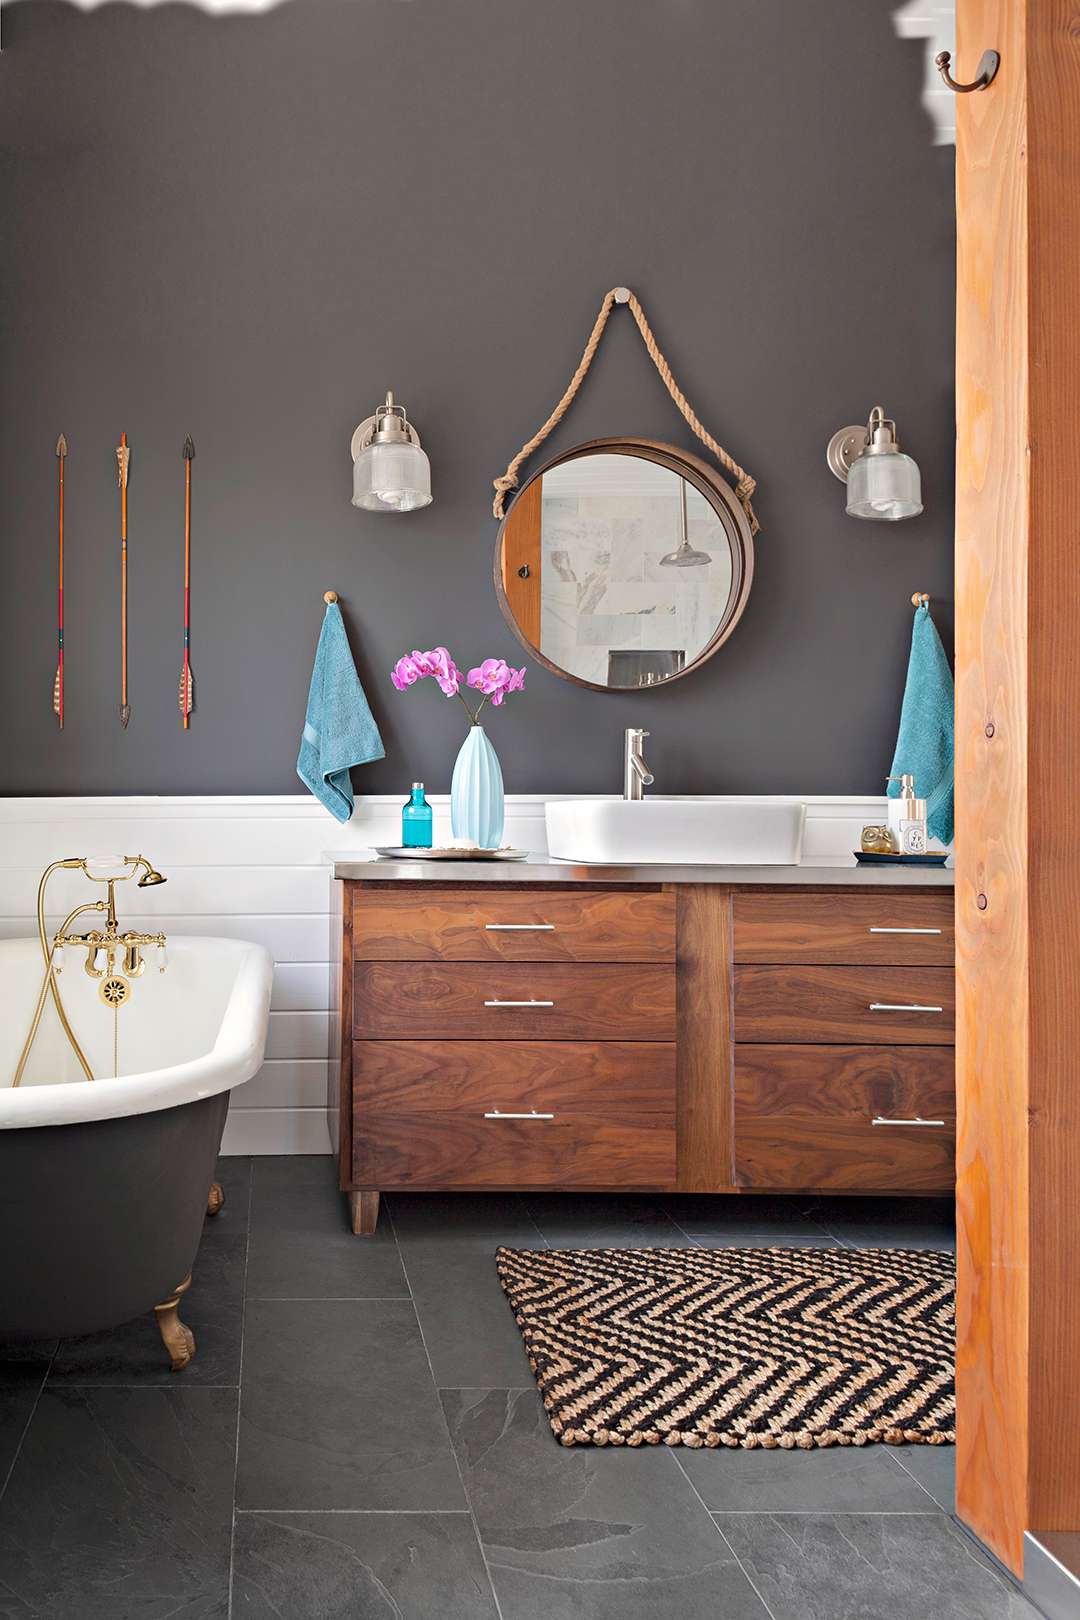 Trends For Best Bathroom Paint Colors 2019 pictures